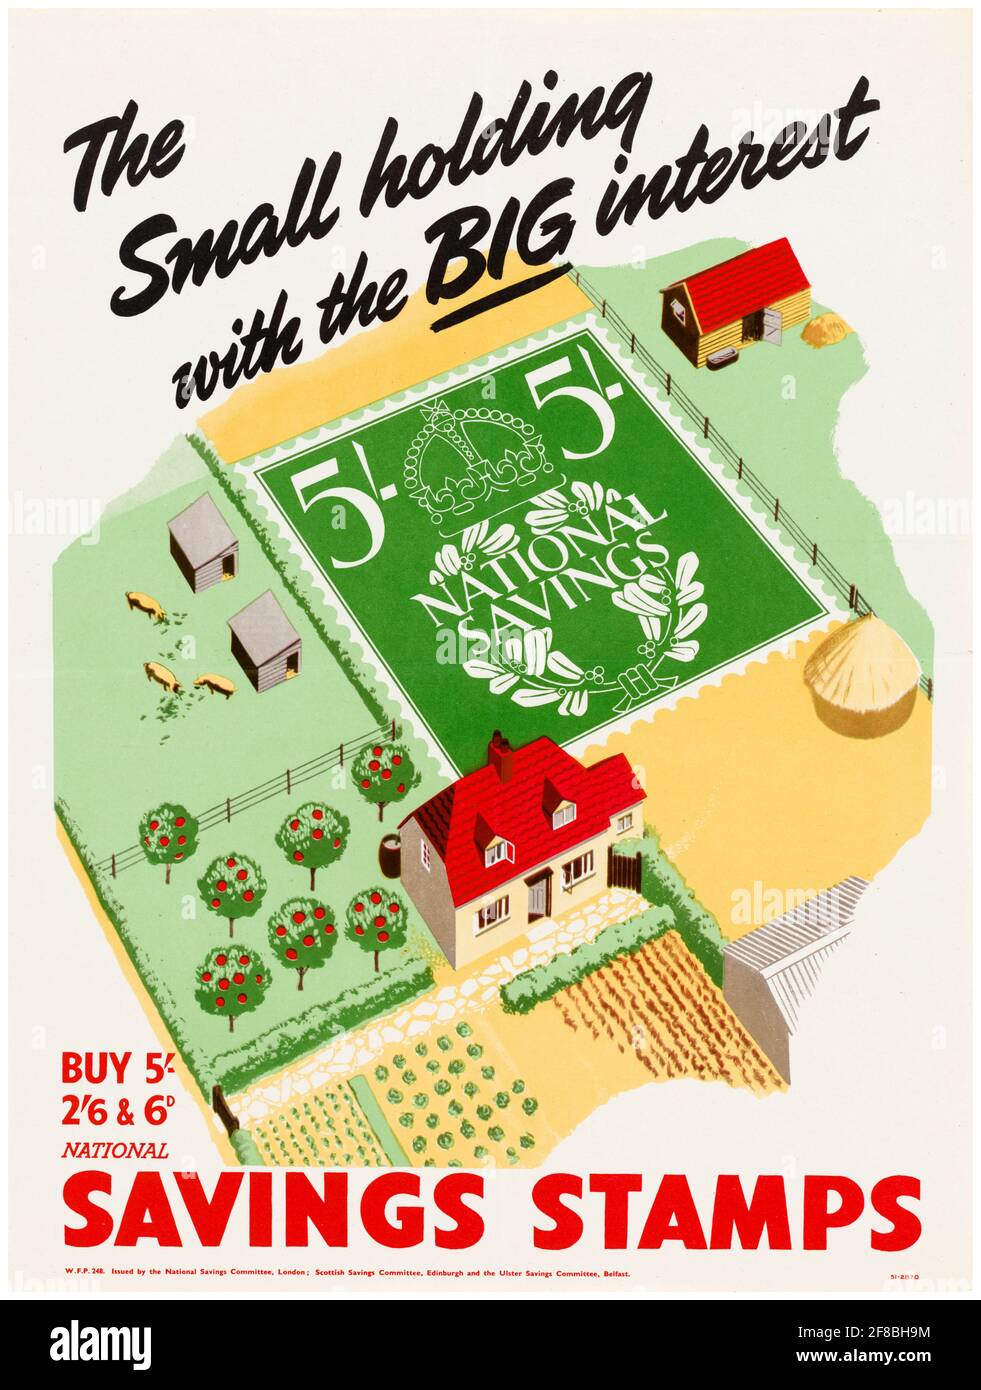 British, WW2 National Savings poster: The Small Holding with the Big Interest (Savings Stamp garden), 1942-1945 Stock Photo